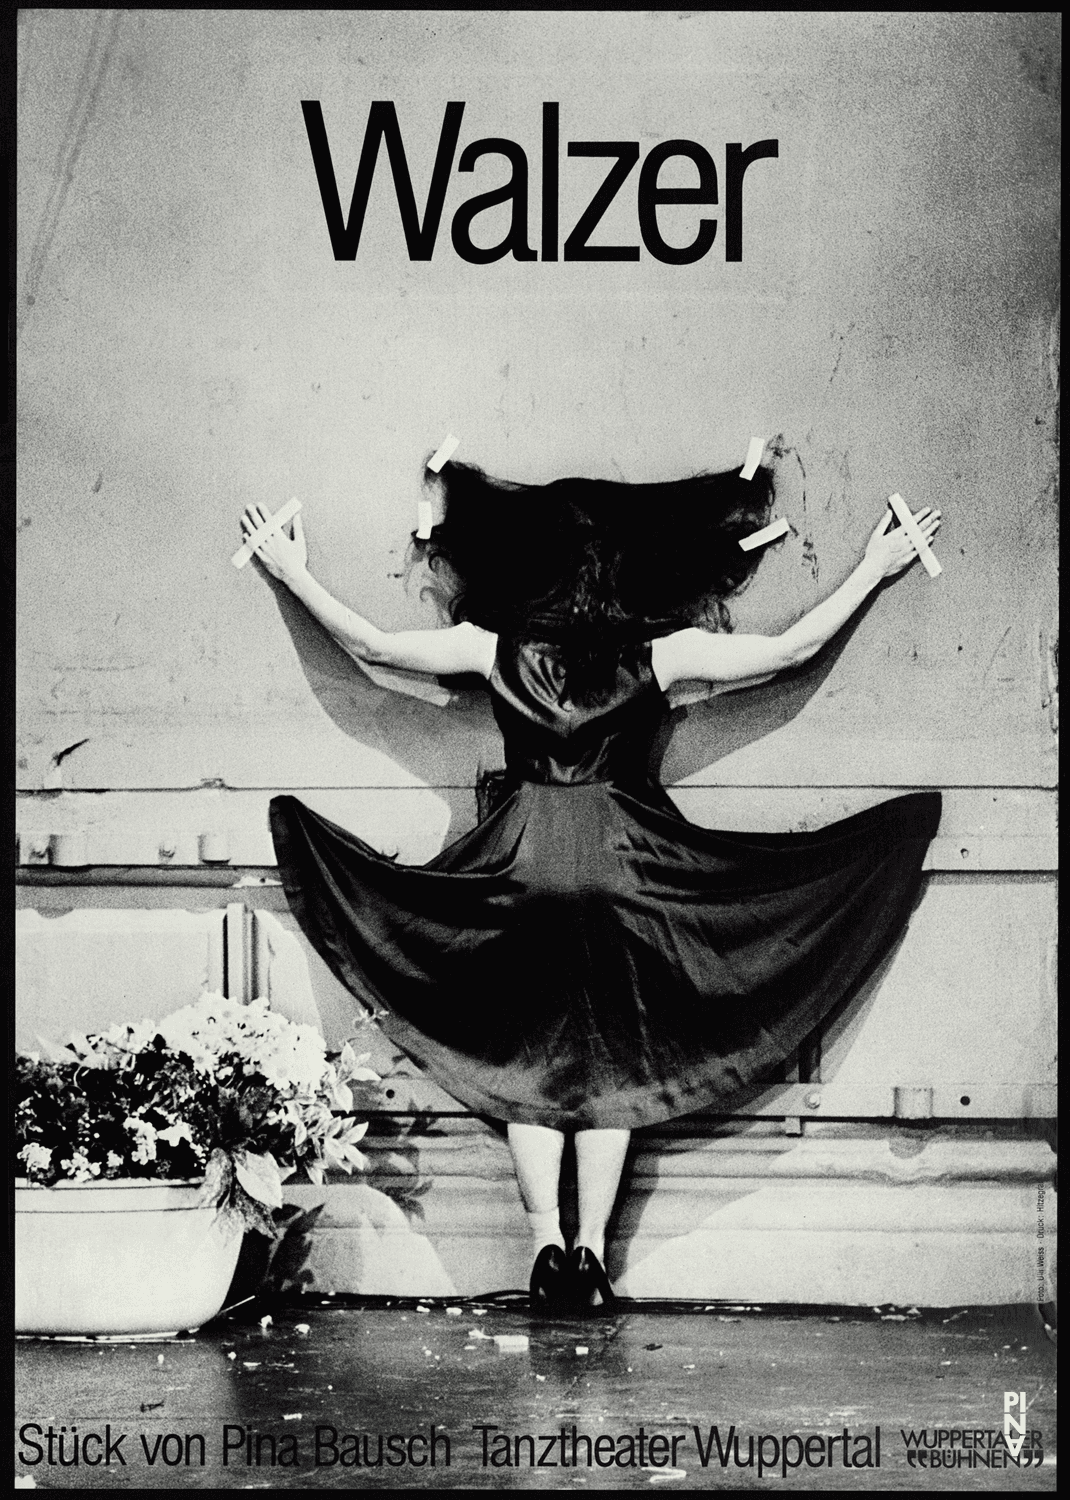 Poster for “Walzer” by Pina Bausch